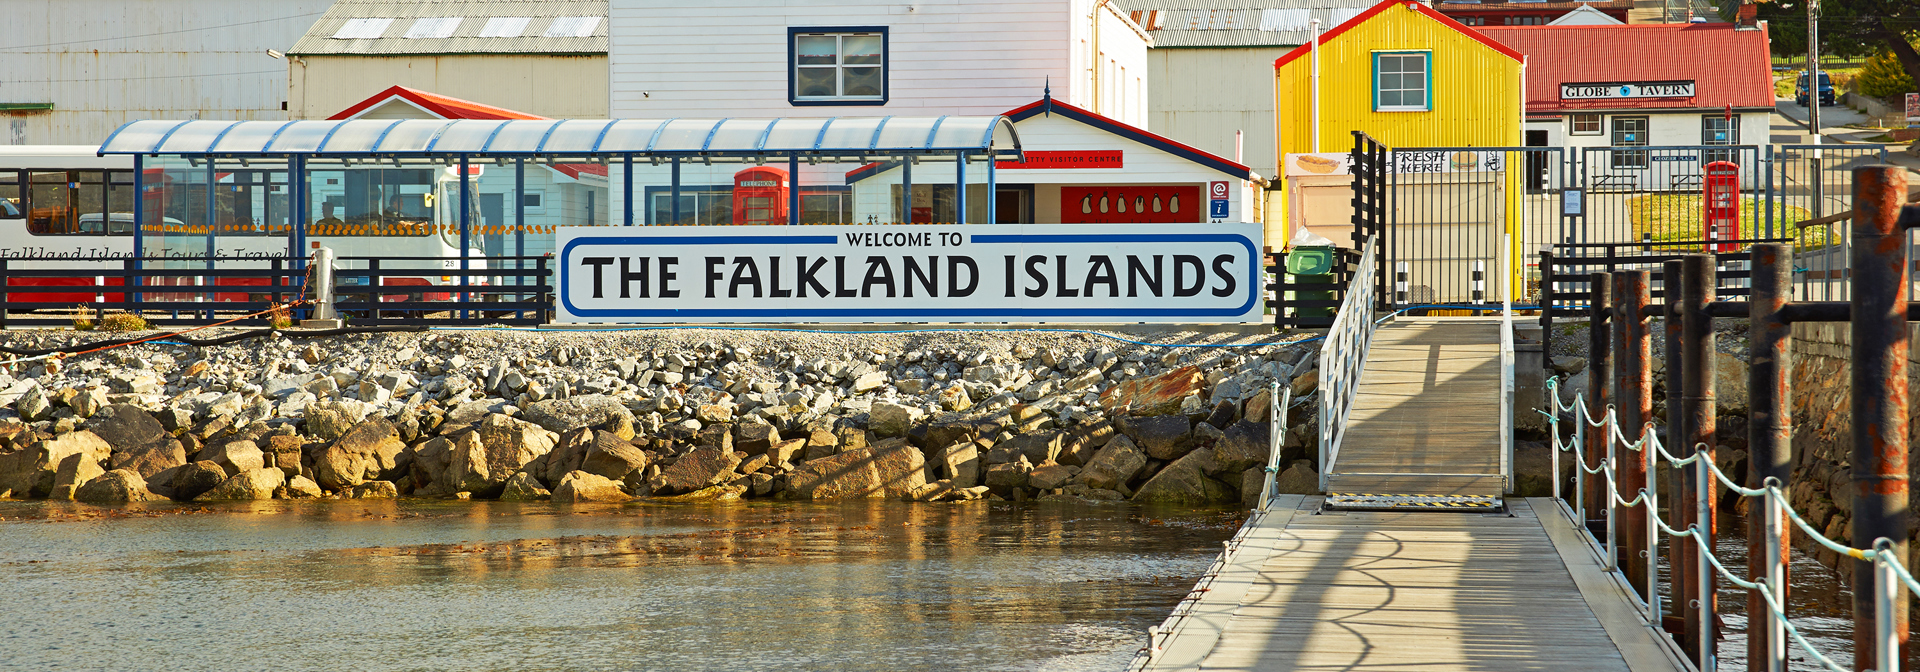 falkland oeer_by_01